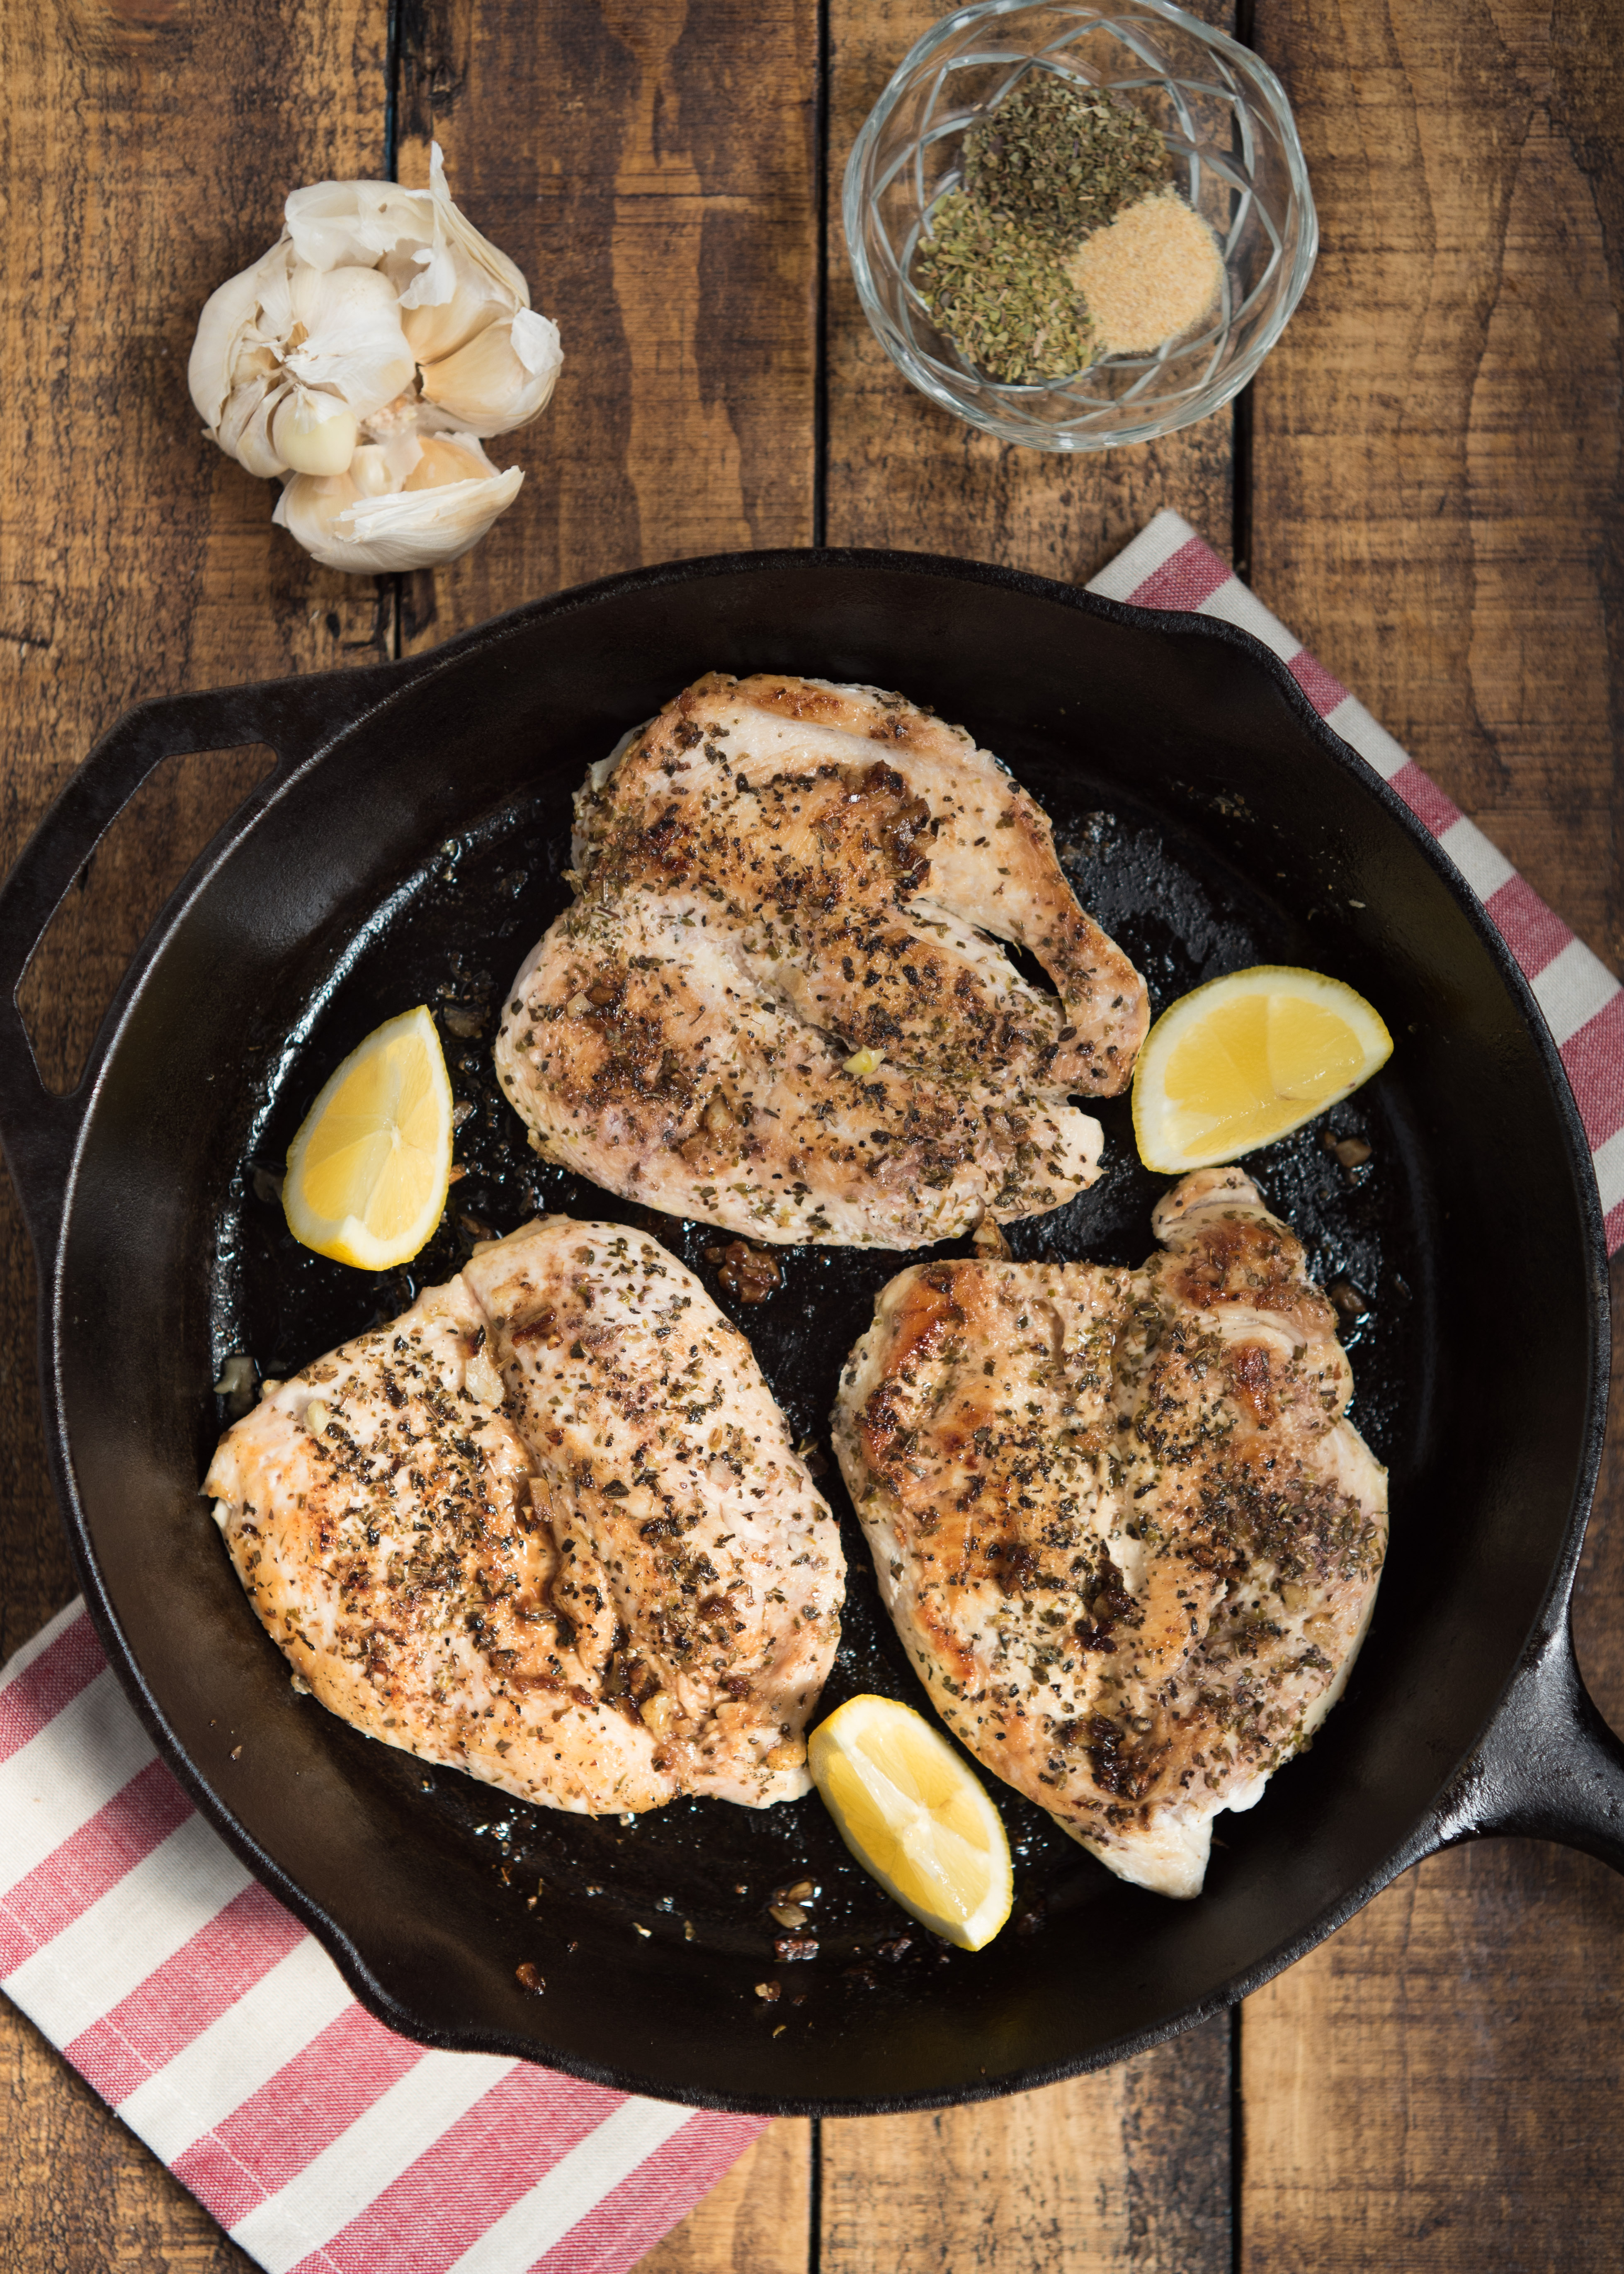 Italian-Seasoned Sautéed Chicken Breasts- my "go-to" chicken that can be transformed into a variety of meals throughout the week.